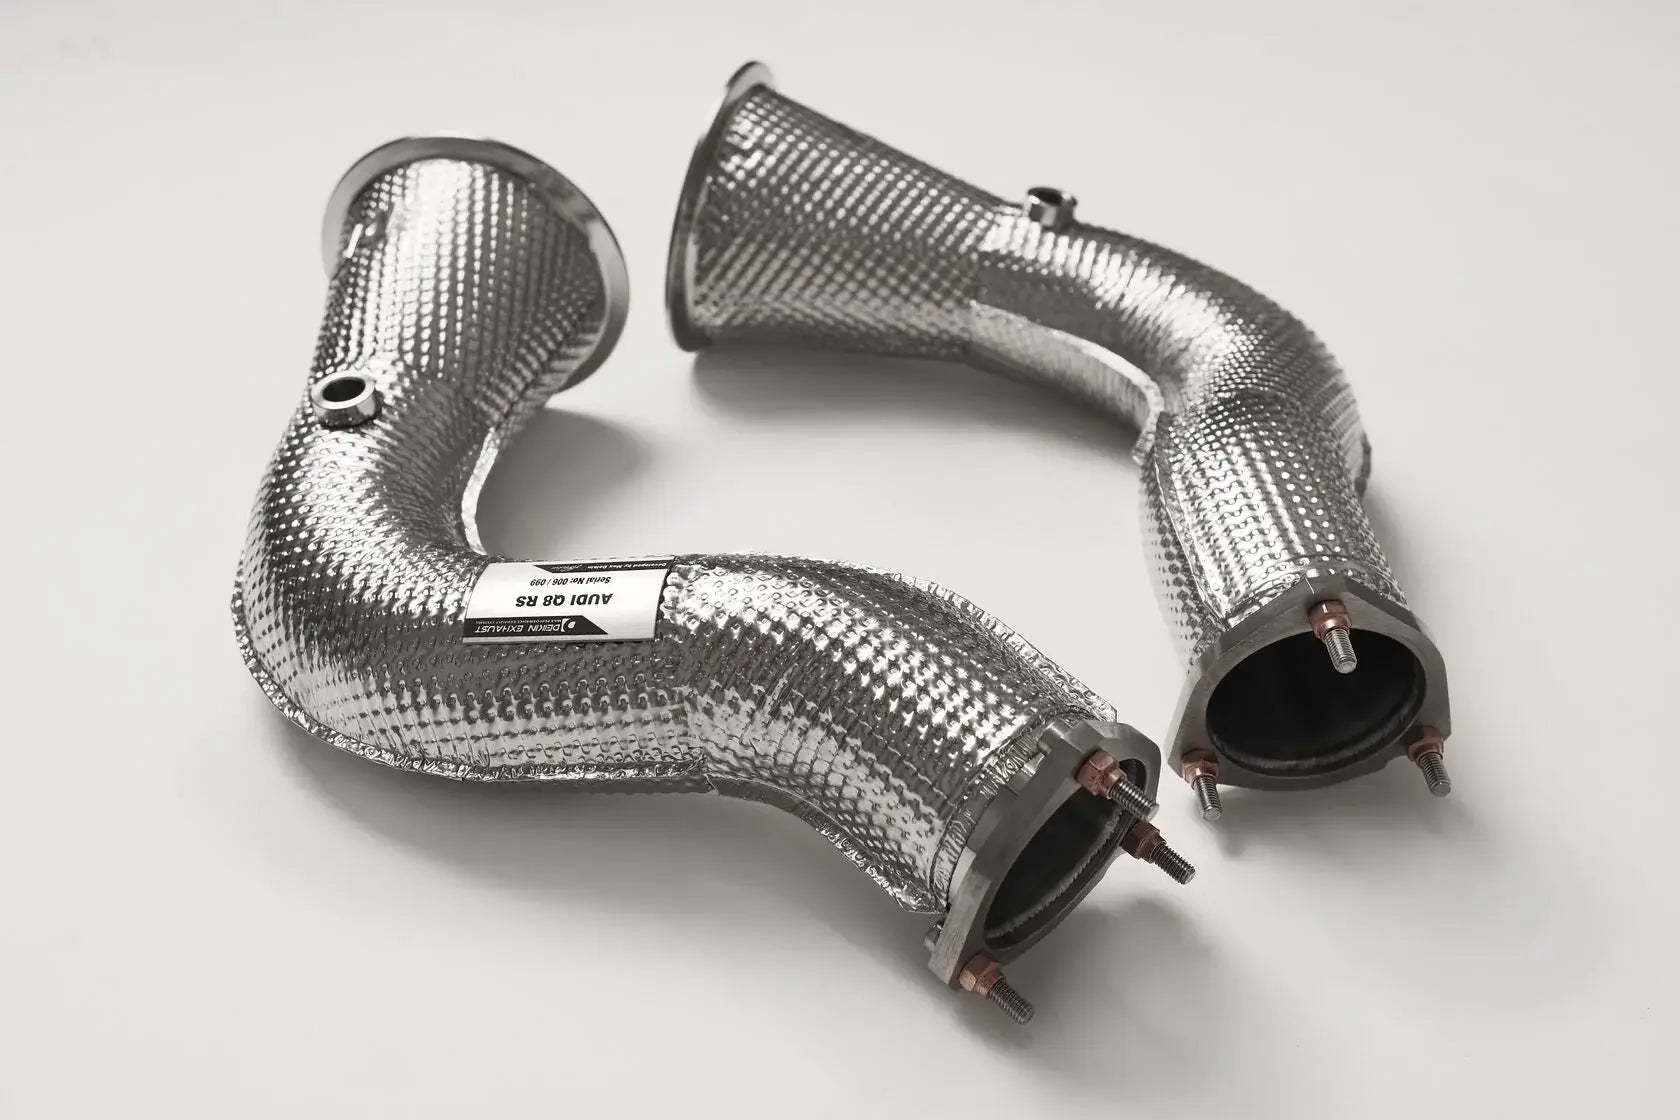 DEIKIN 10-AUDI.RS.Q8-DP Downpipe for Audi RS Q8 without HeatShield Photo-3 